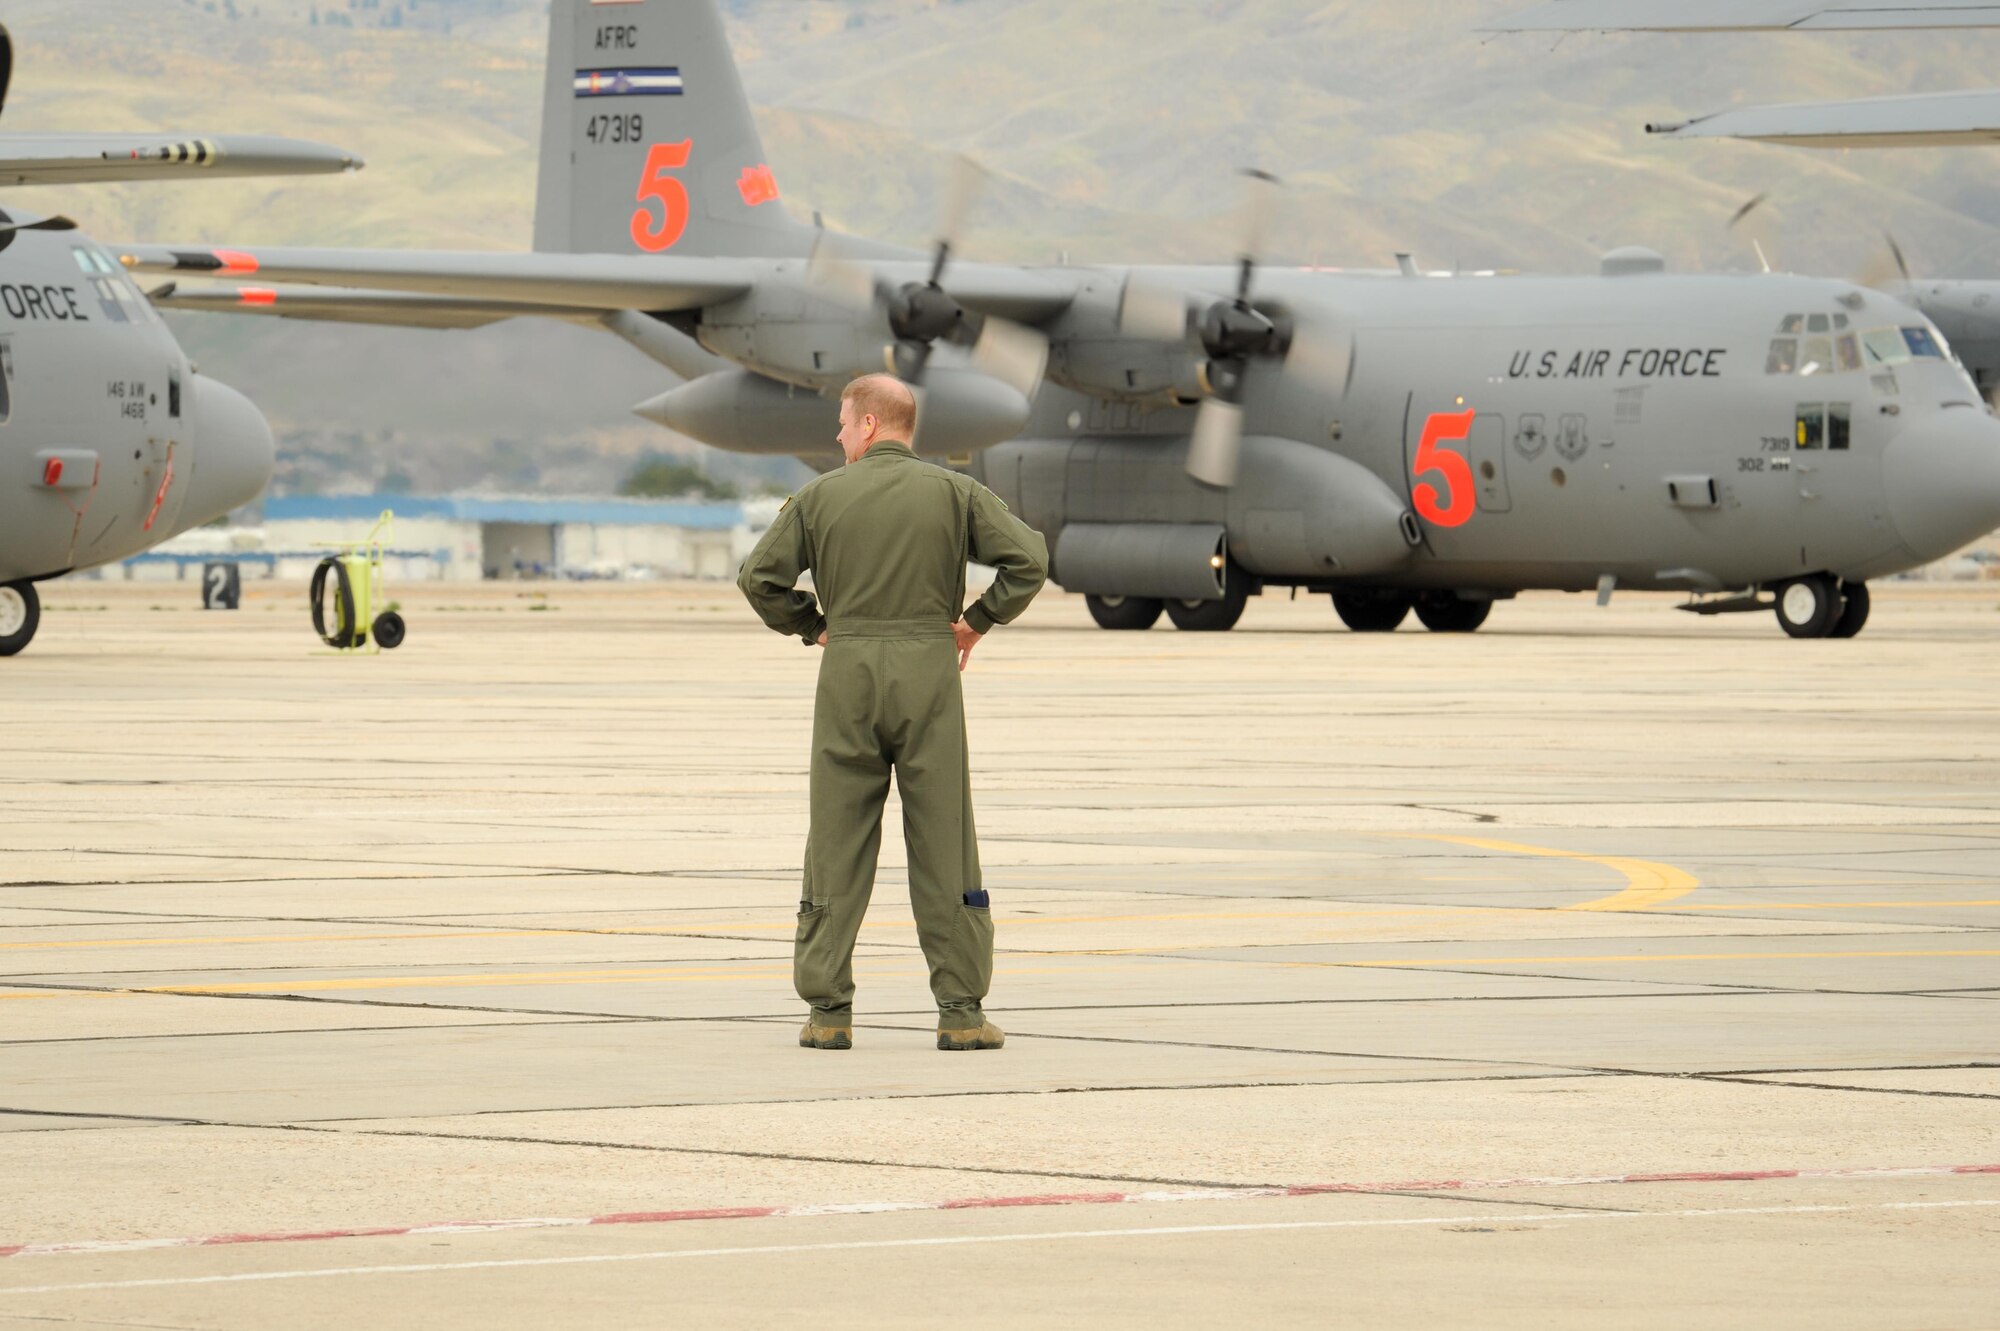 Col. James DeVere, 302nd Airlift Wing commander observes the arrival of “MAFFS 5,” a C-130 Hercules, at Gowen Field Air National Guard Base, Idaho, April 20, 2017.  Approximately 70 Air Force reservists and two MAFFS-equipped C-130s from the 302nd AW will participate in classroom and flight certification training. (U.S. Air Force photo/Maj. Jolene Bottor-Ortiona)